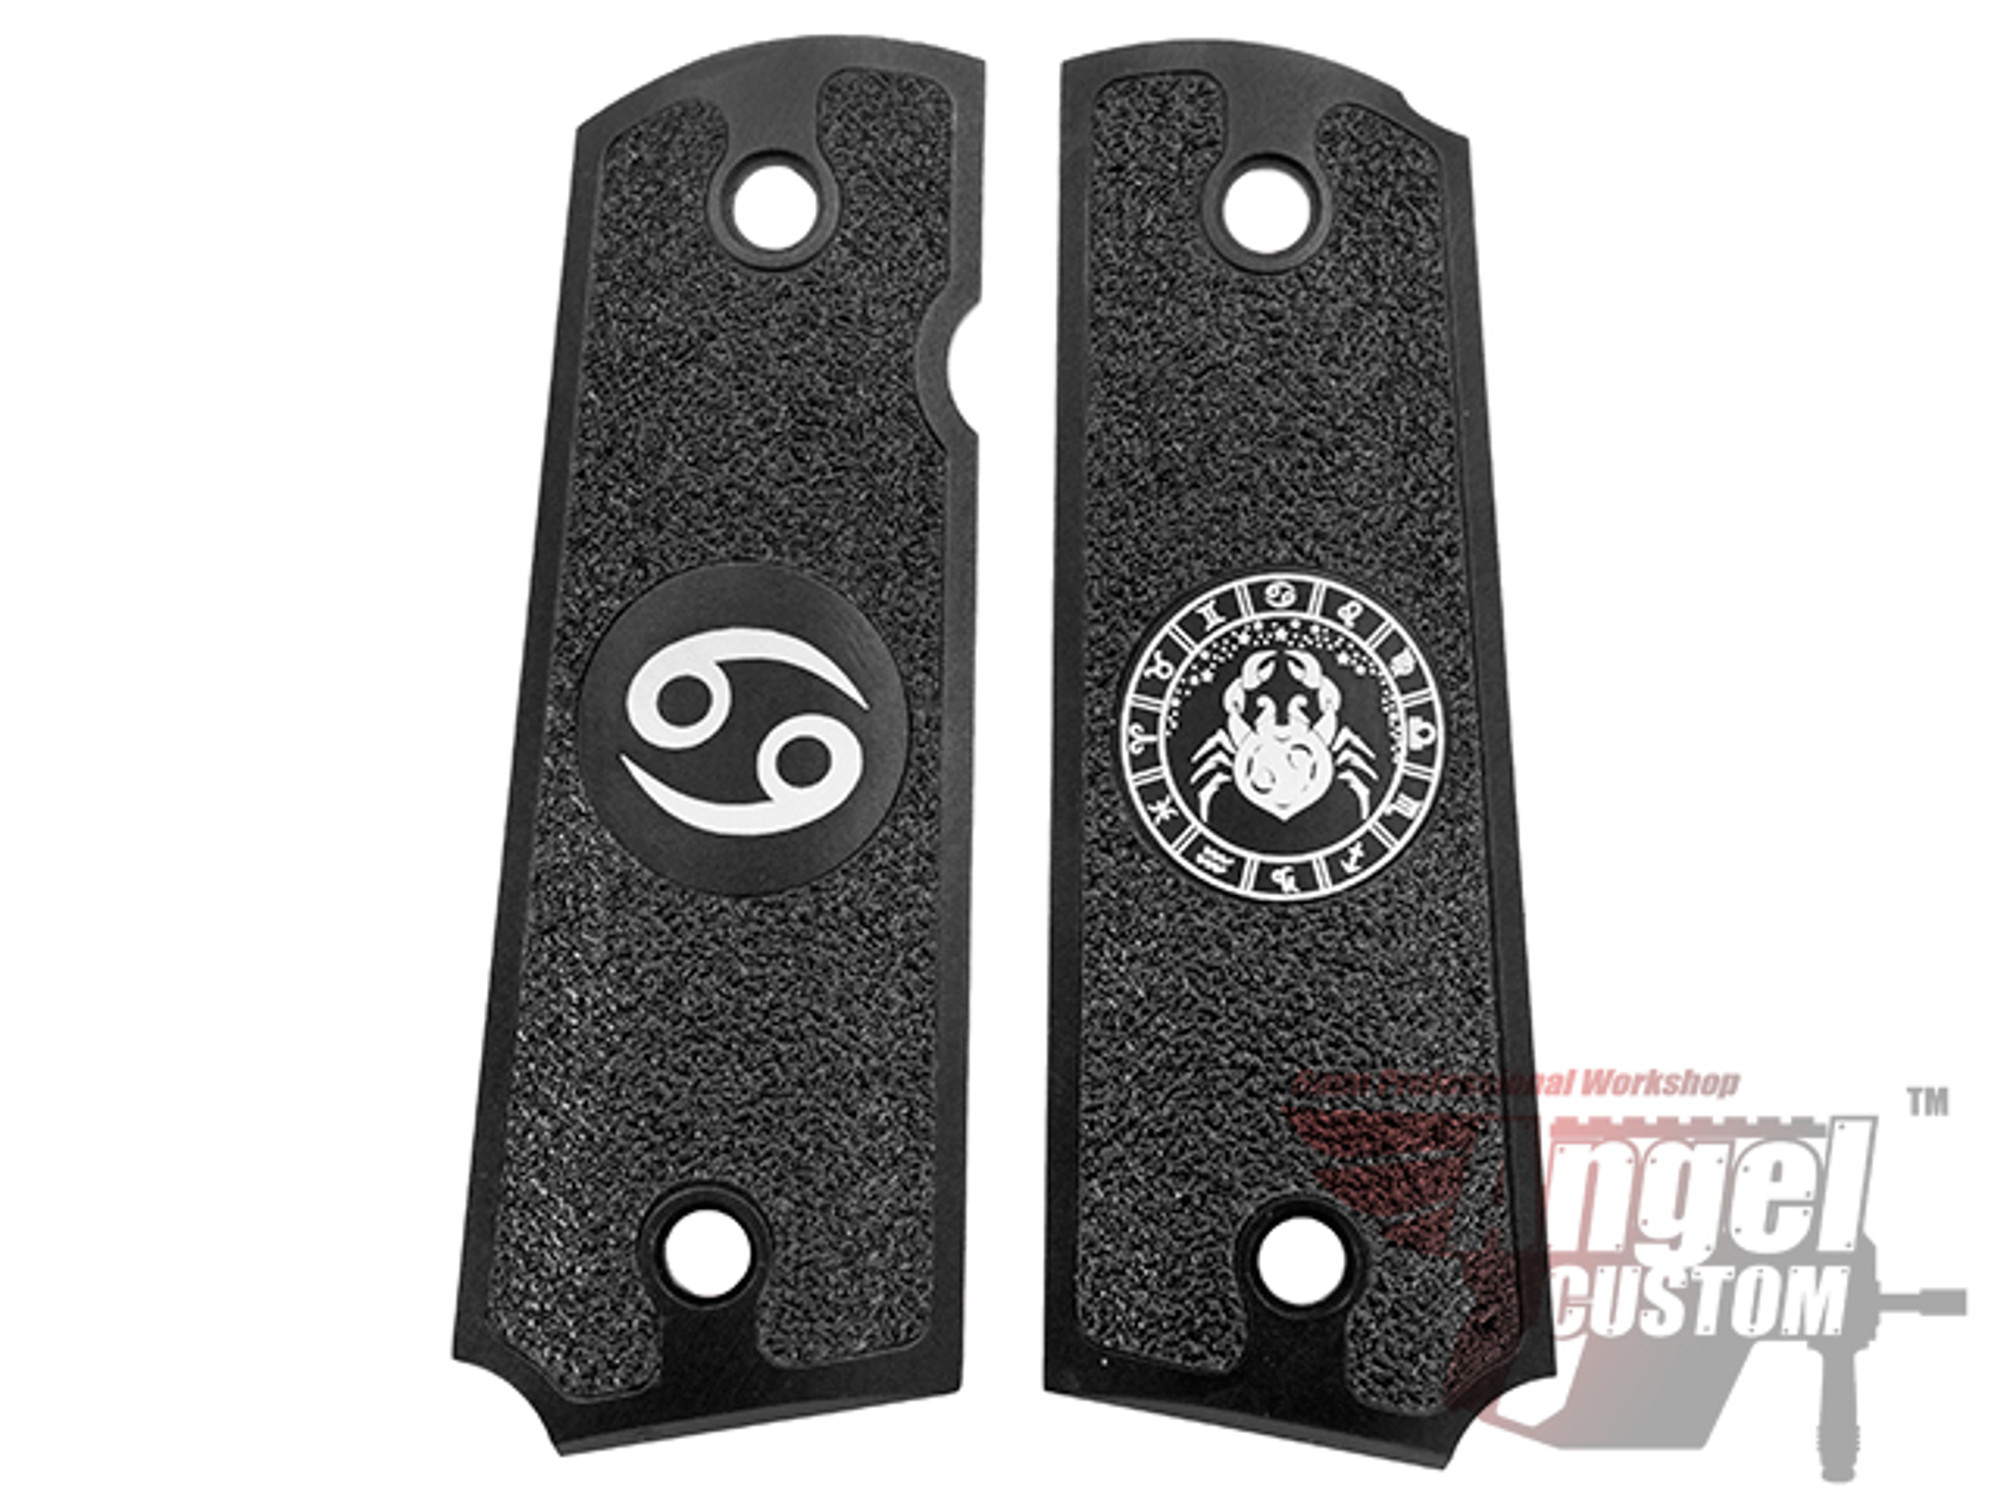 Angel Custom CNC Machined Tac-Glove "Zodiac" Grips for WE-Tech 1911 Series Airsoft Pistols - Black (Sign: Cancer)